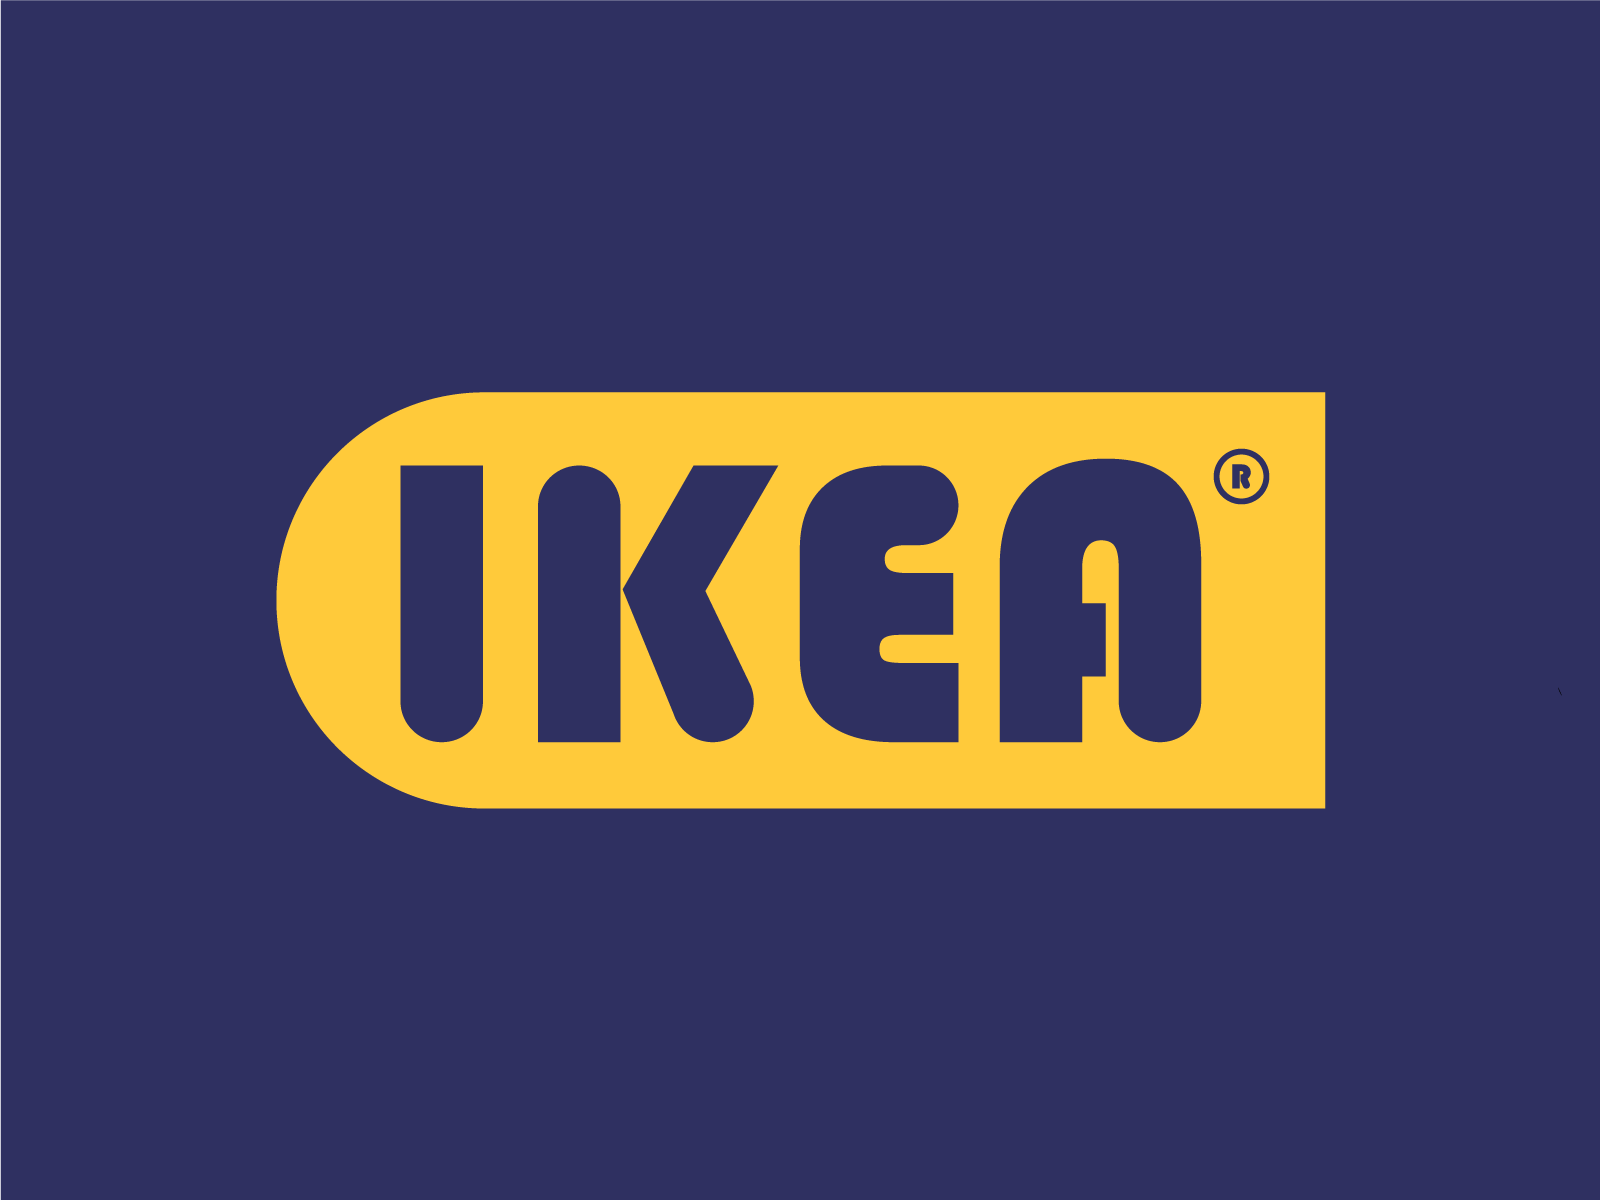 Ikea Refont by maxe on Dribbble